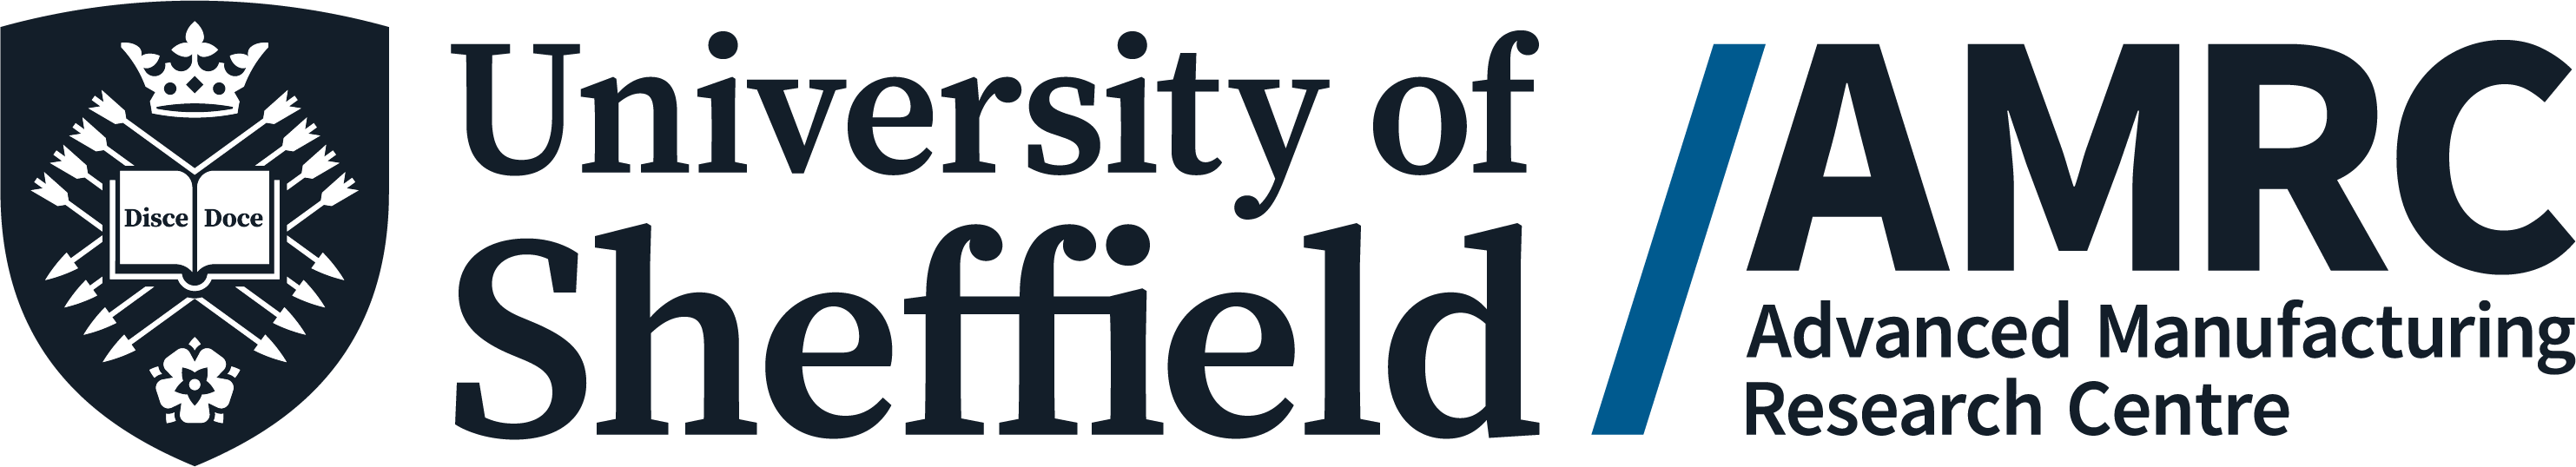 University of Sheffield Advanced Manufacturing Research Centre (AMRC)  logo